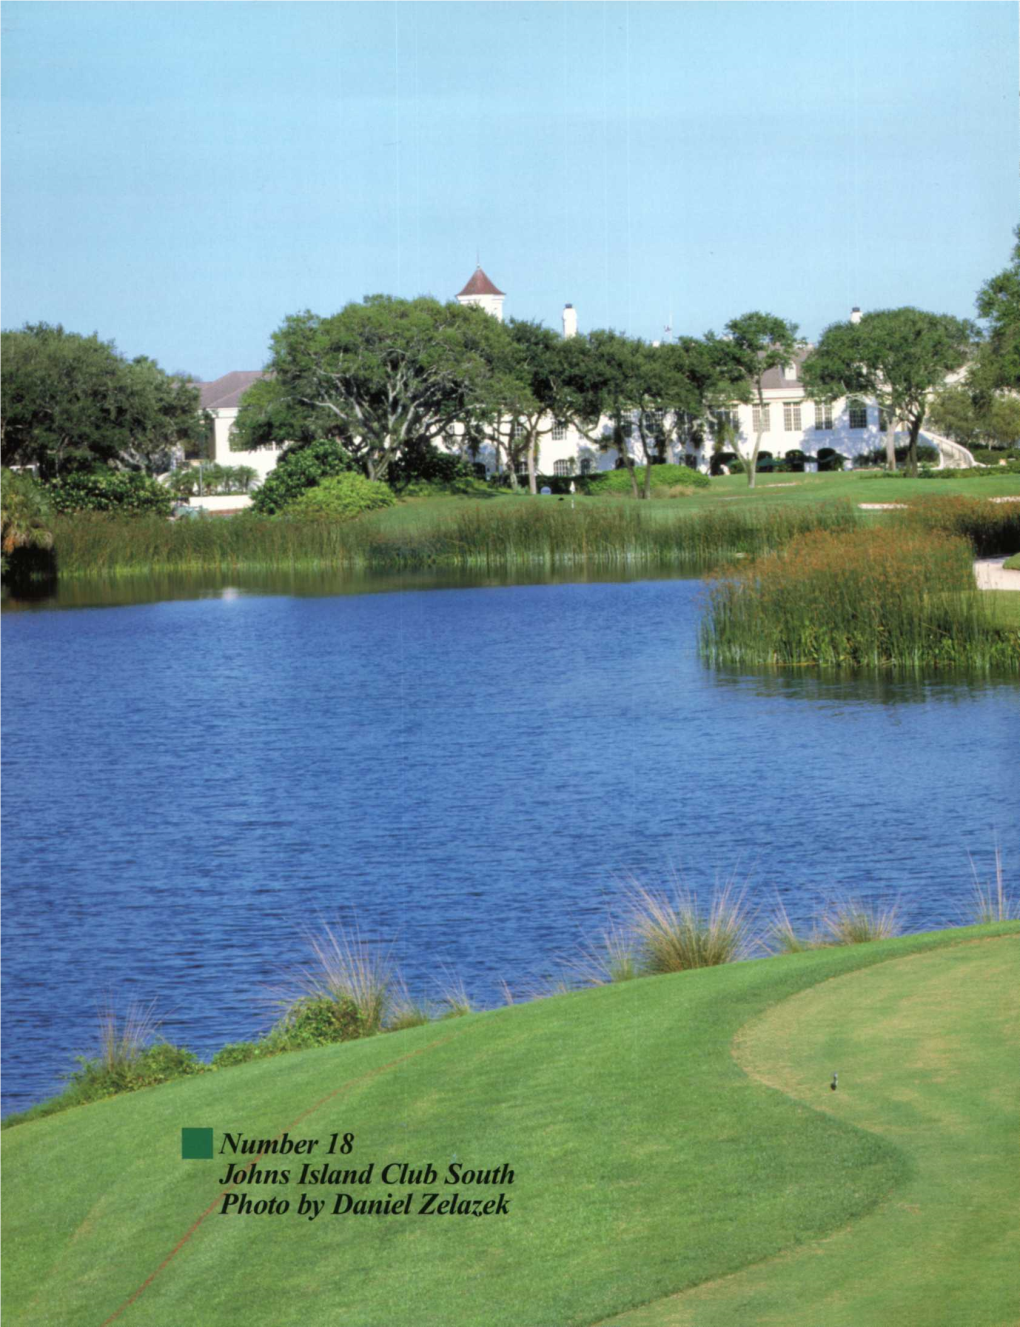 Number 18 Johns Island Club South Photo by Daniel Zelazek by Joel Jackson by Pete Dye with the Collaboration of Jack Nicklaus